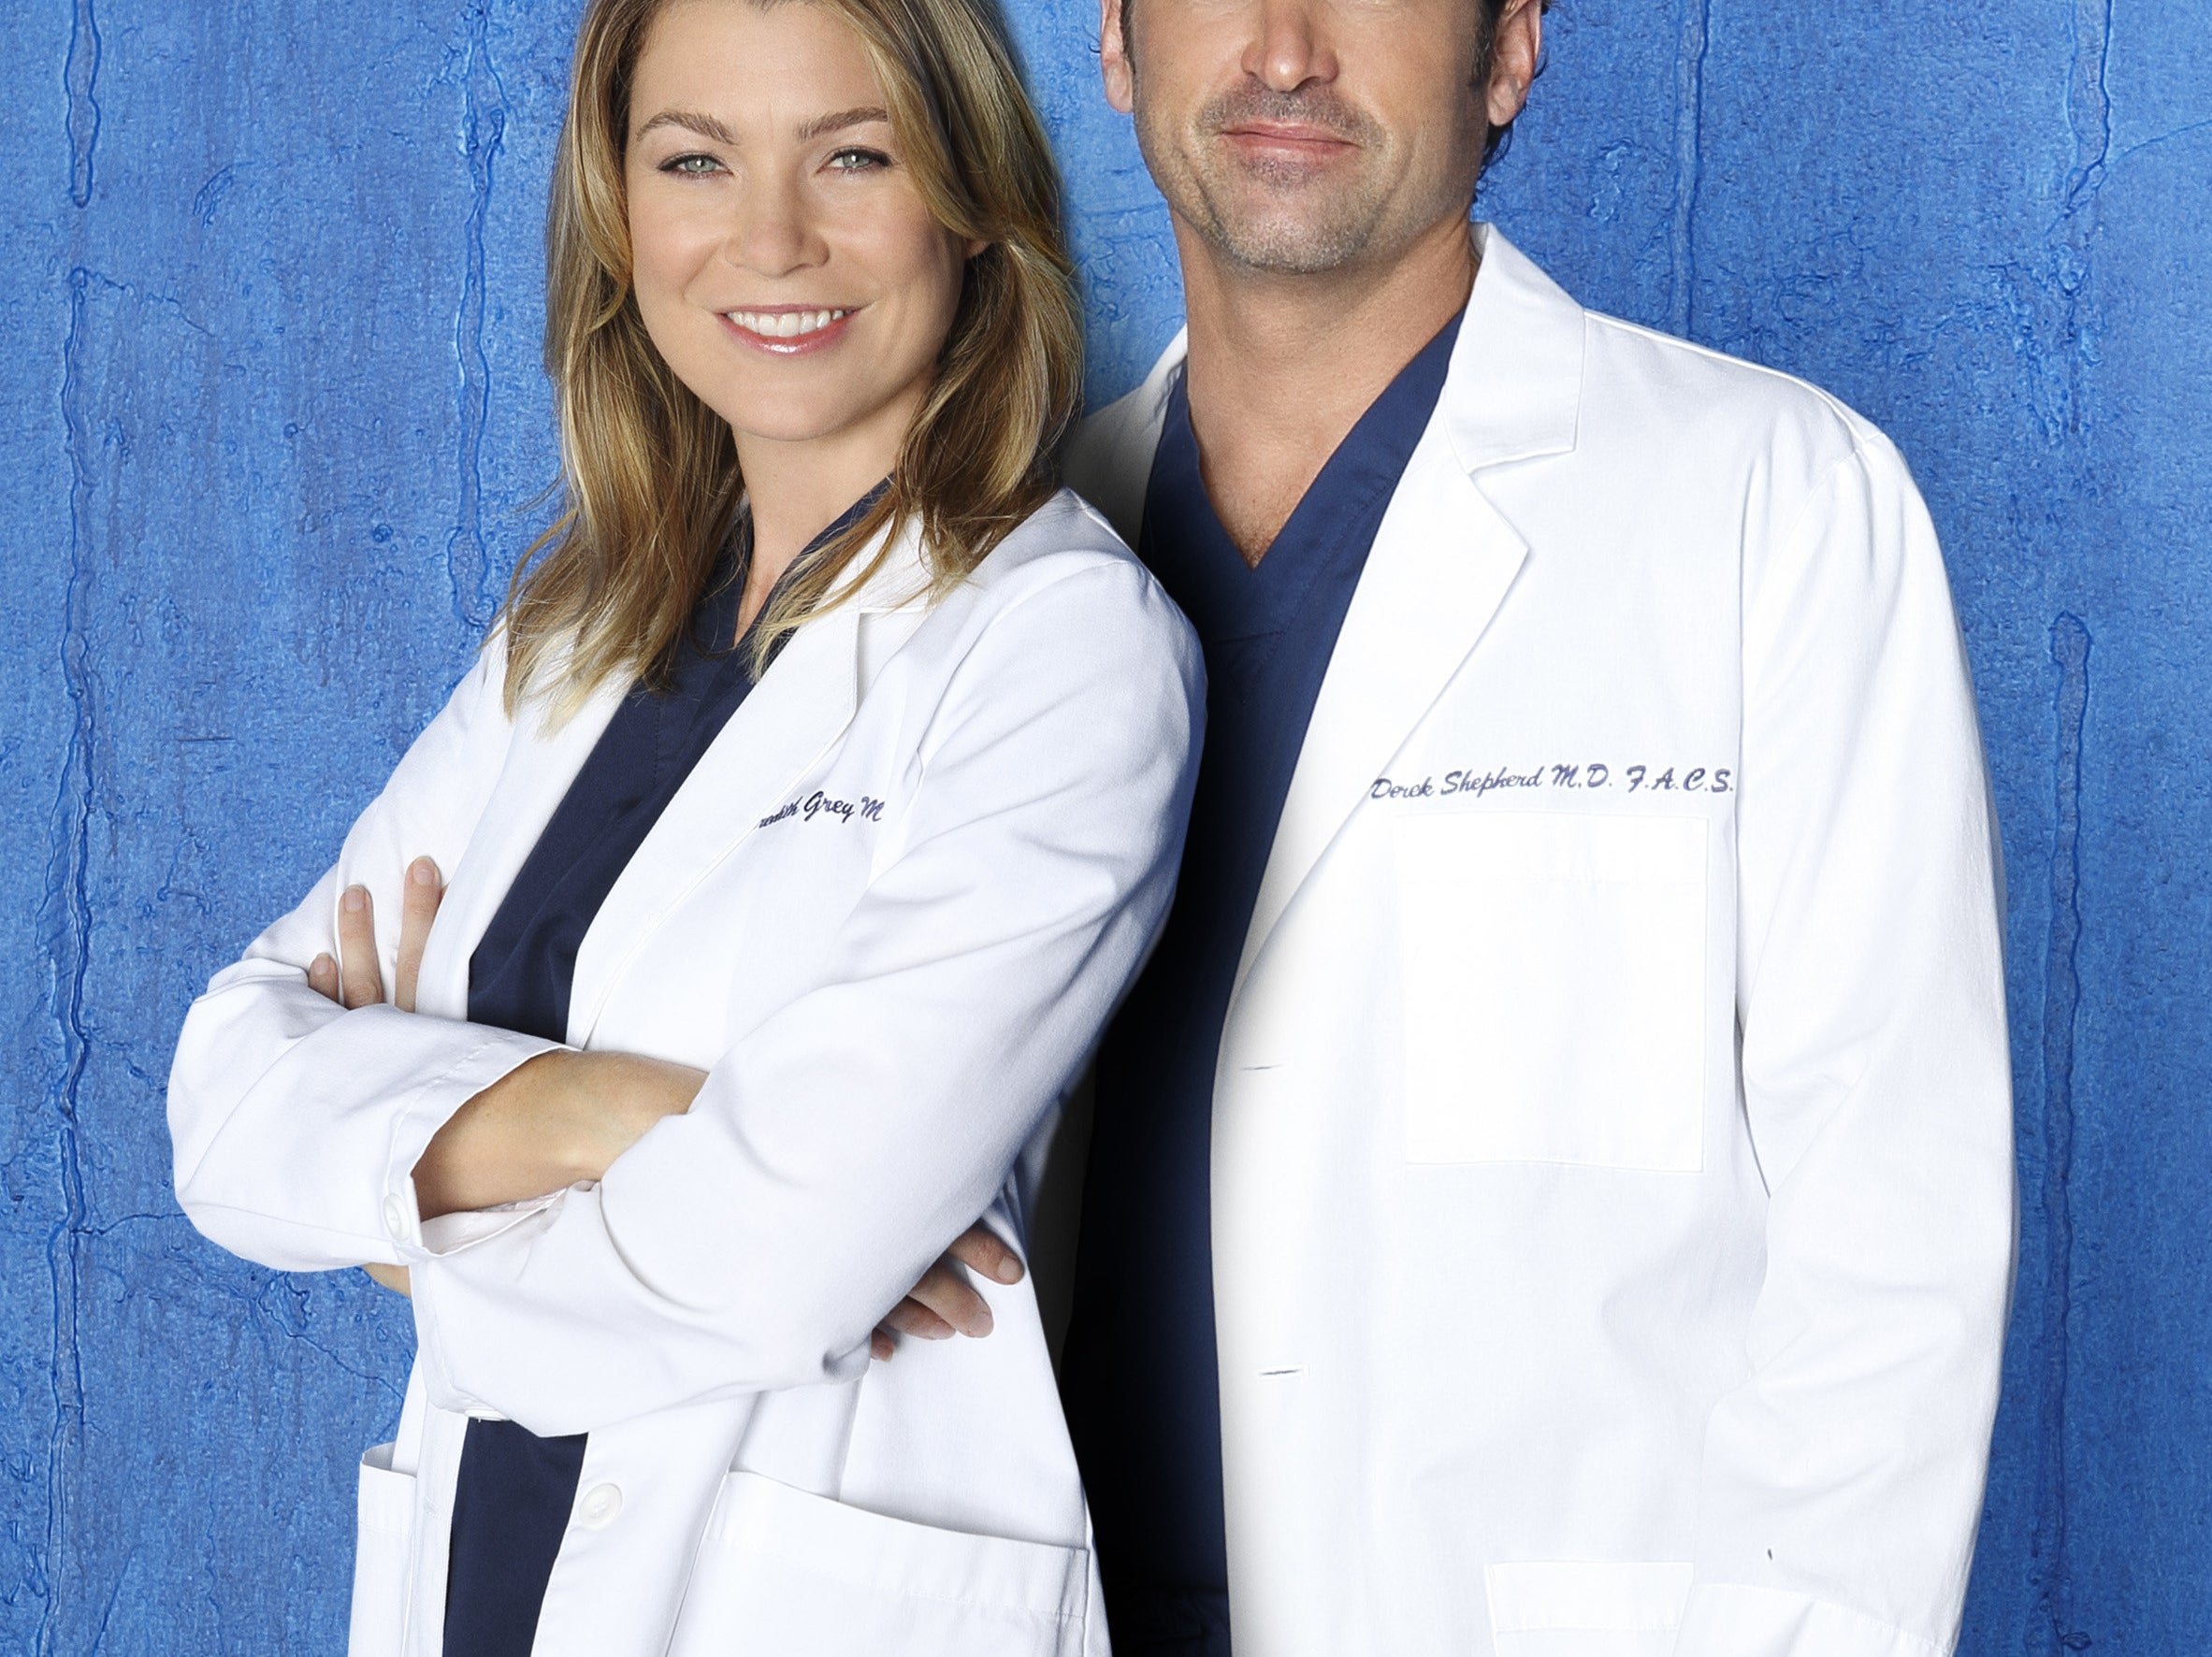 Meredith poses with McDreamy